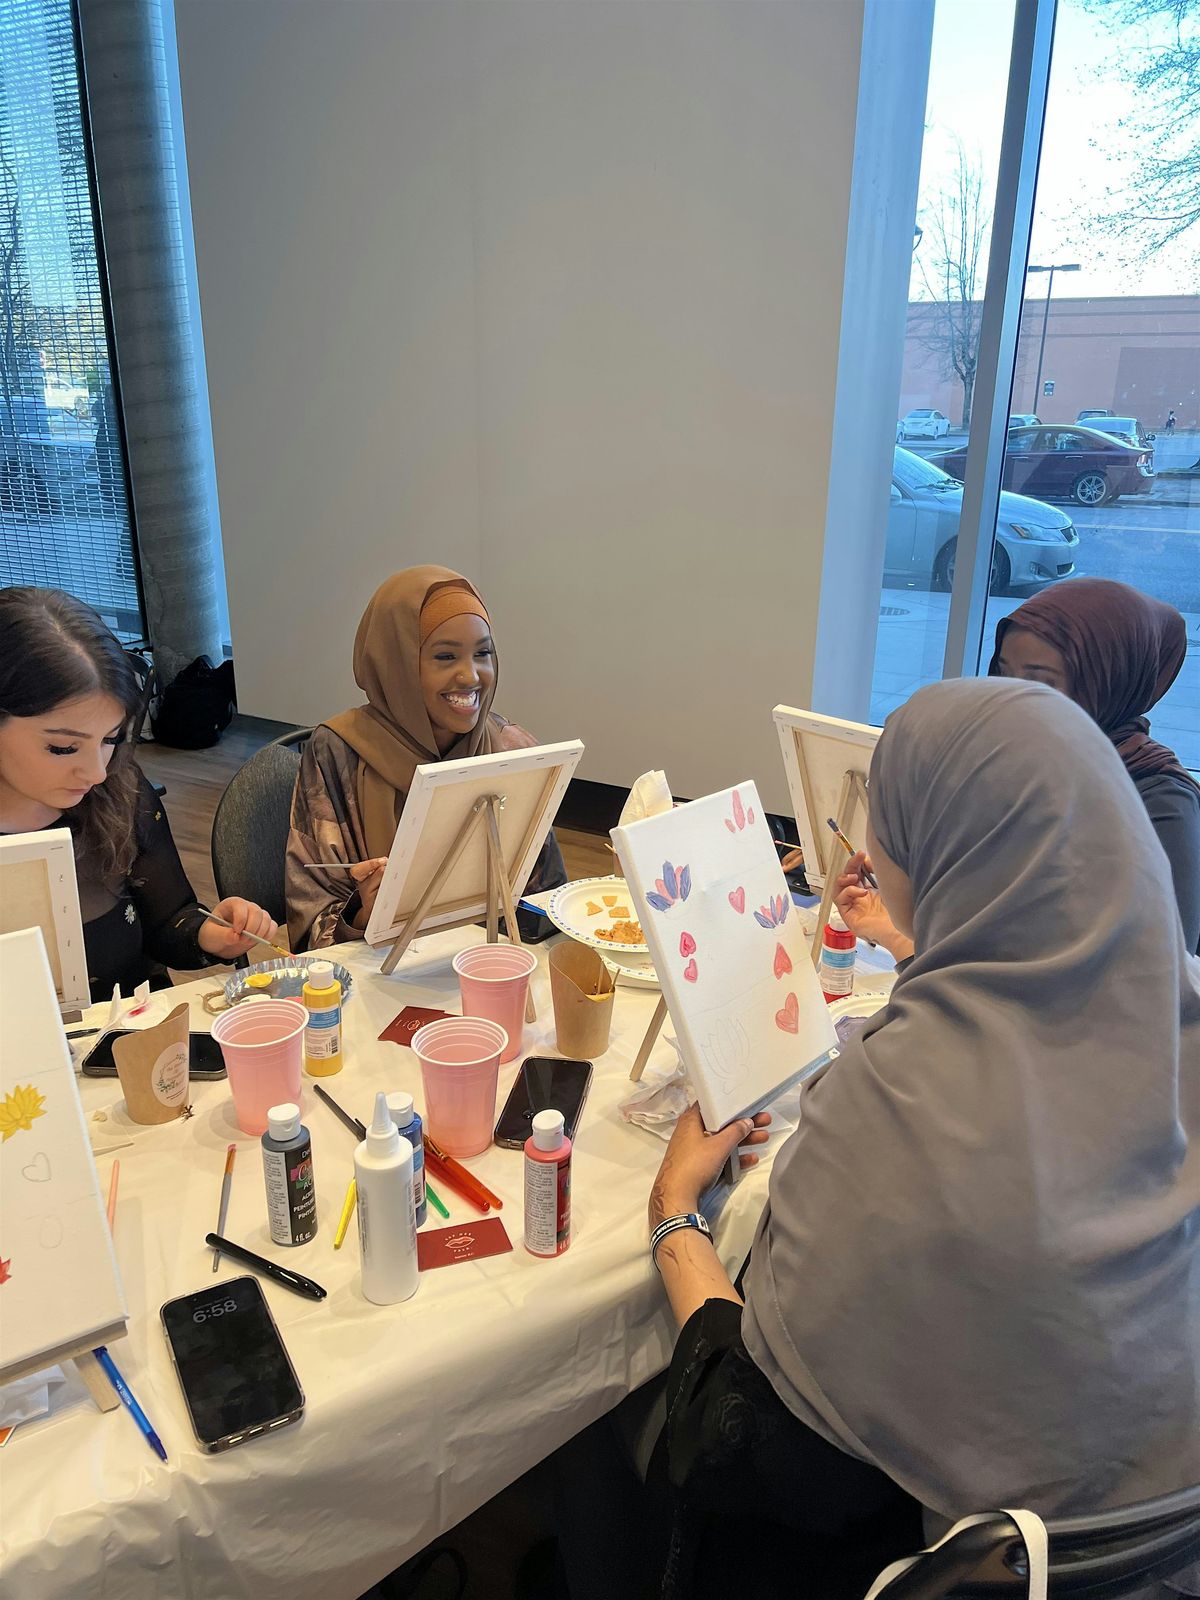 Let Her Talk: Paint Night